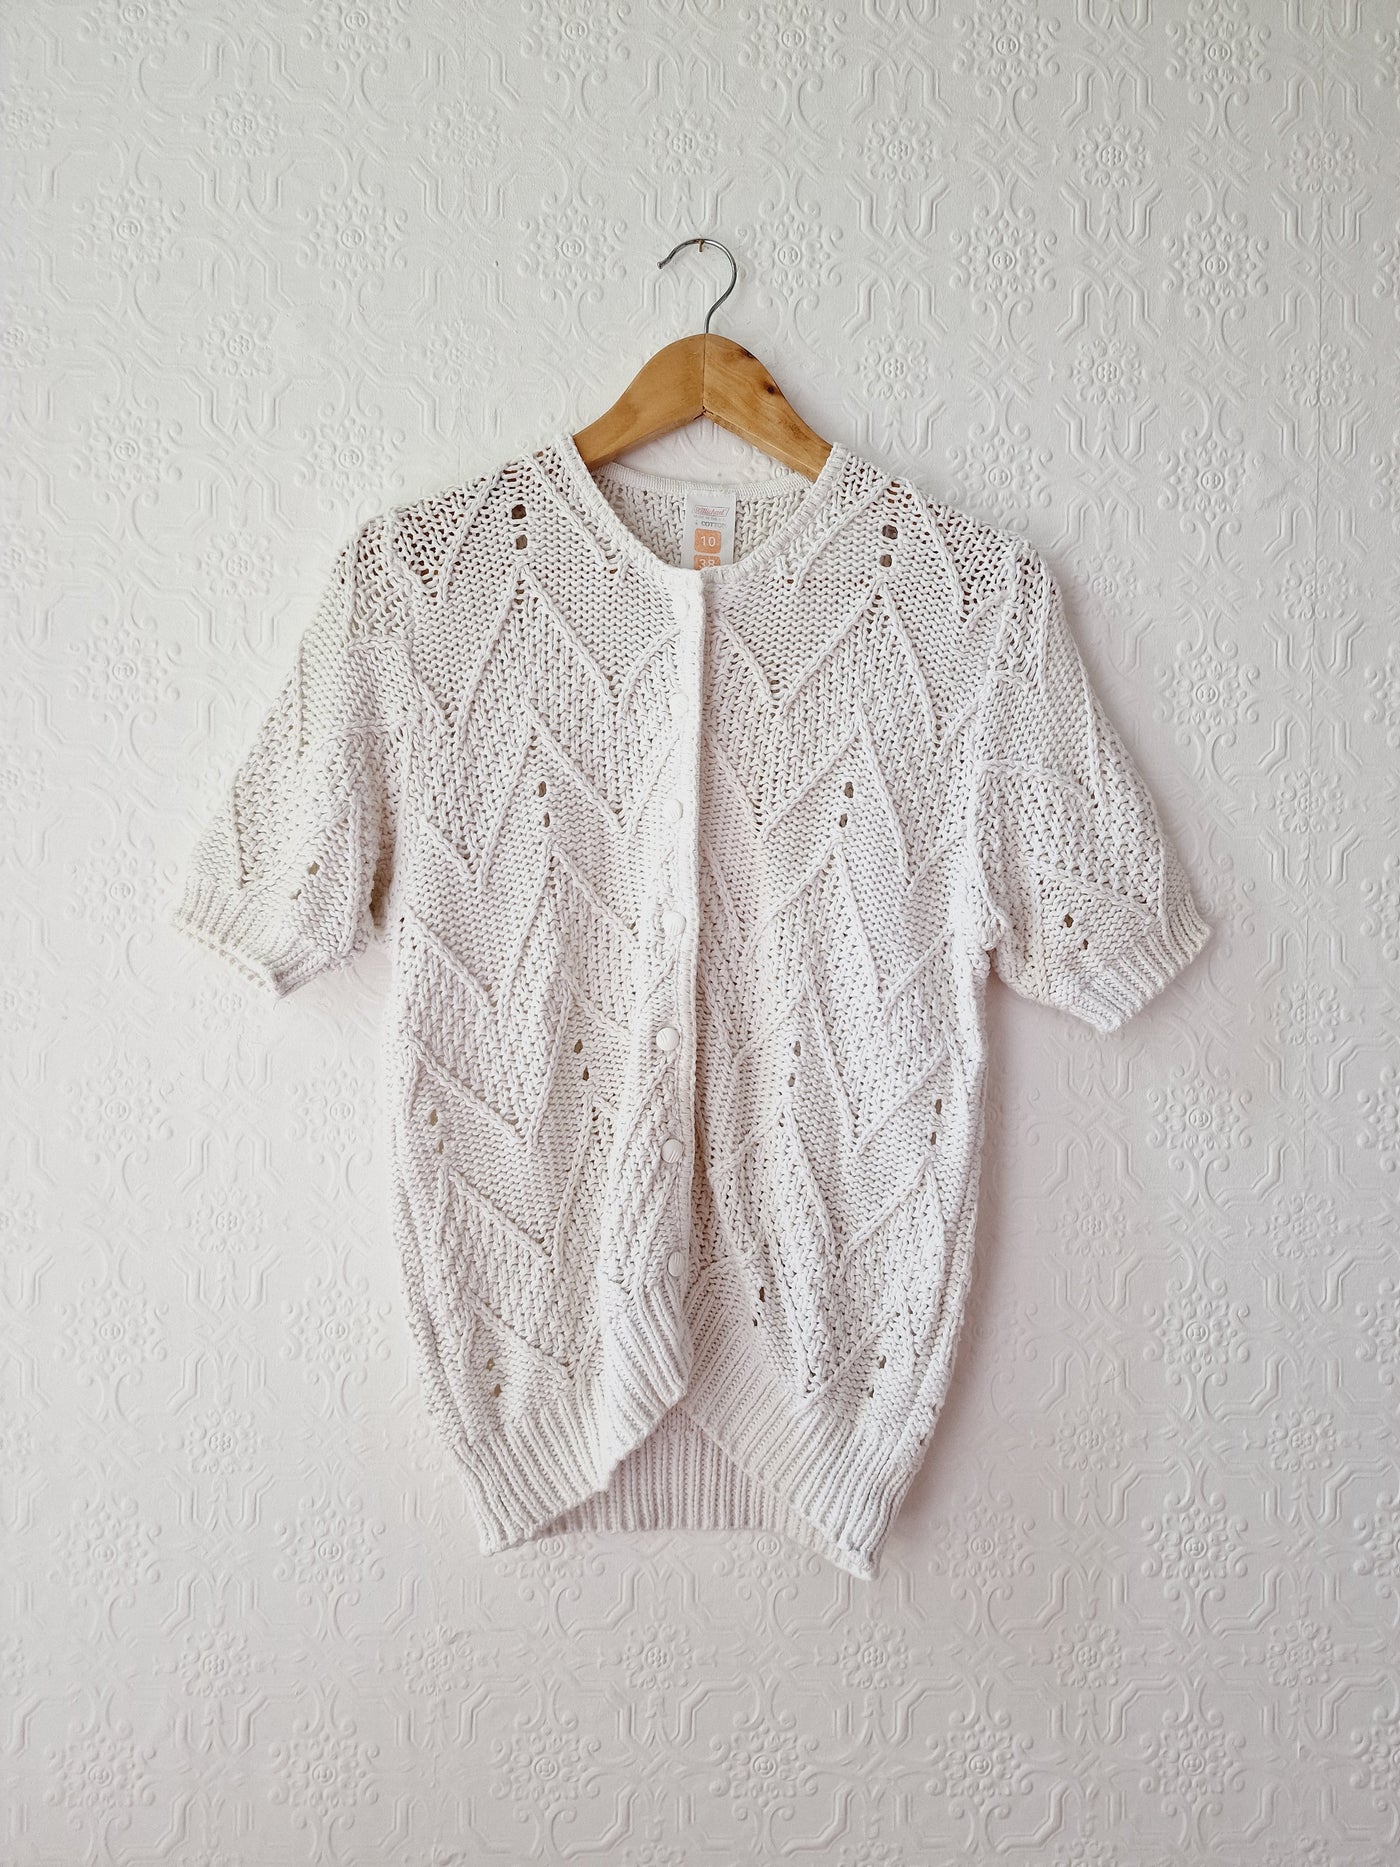 Vintage White Cotton Knitted Cardigan with Short Sleeves - M